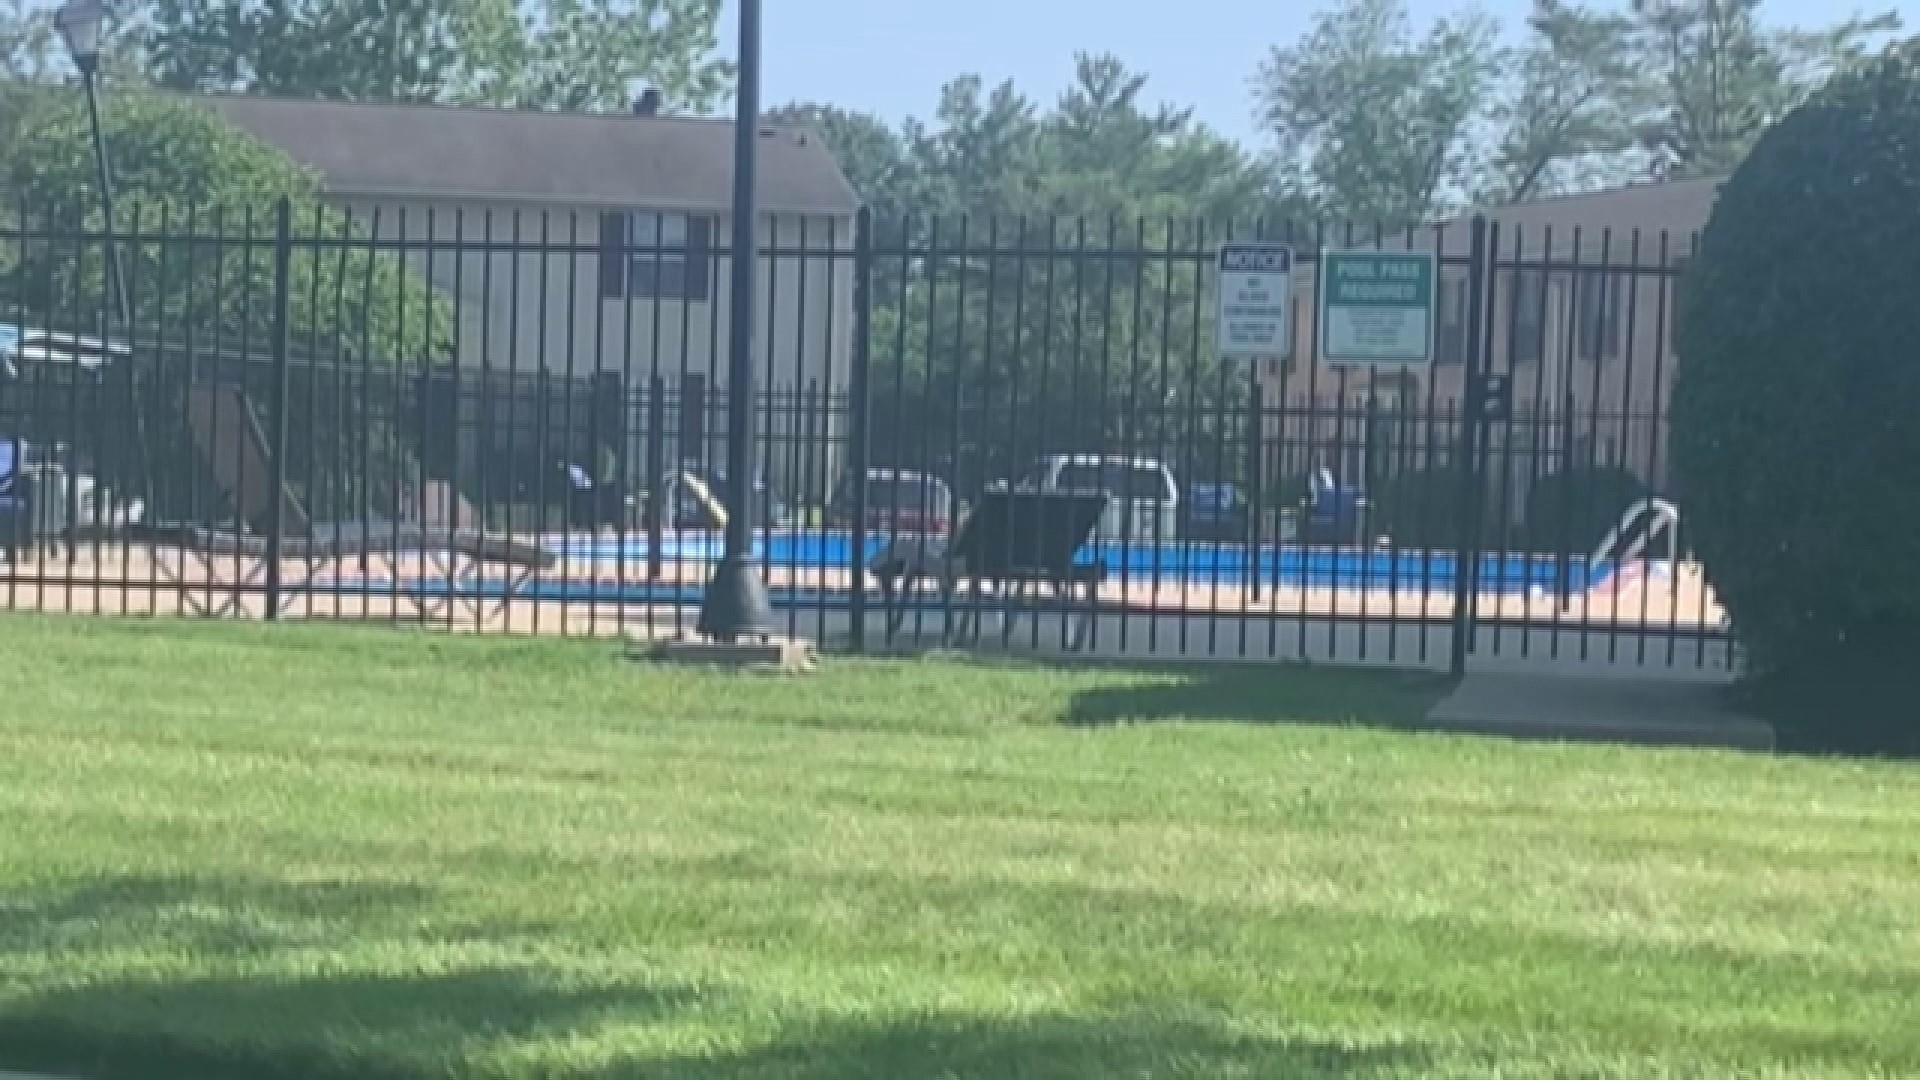 Police said the child was pulled from the pool around 3 p.m. at the Abney Lakes Apartments.